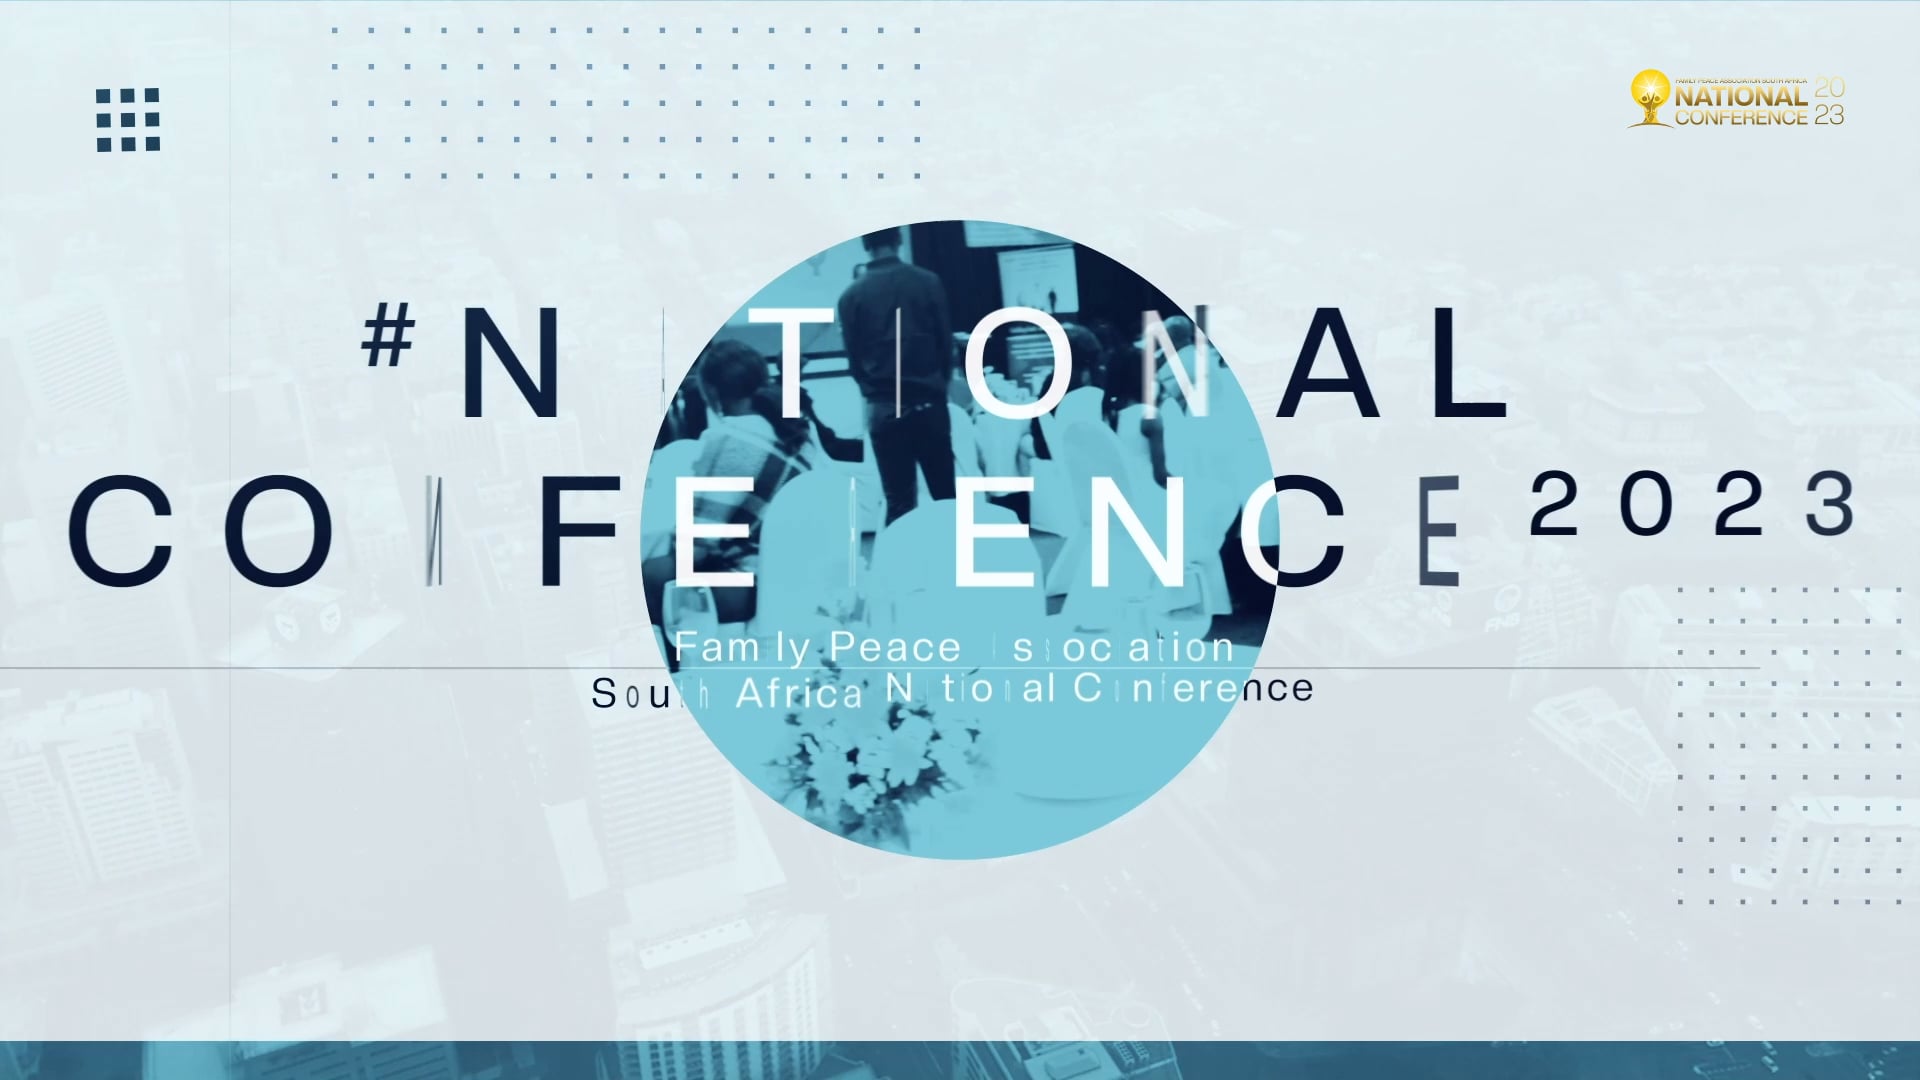 FPA National Conference Promo Video on Vimeo